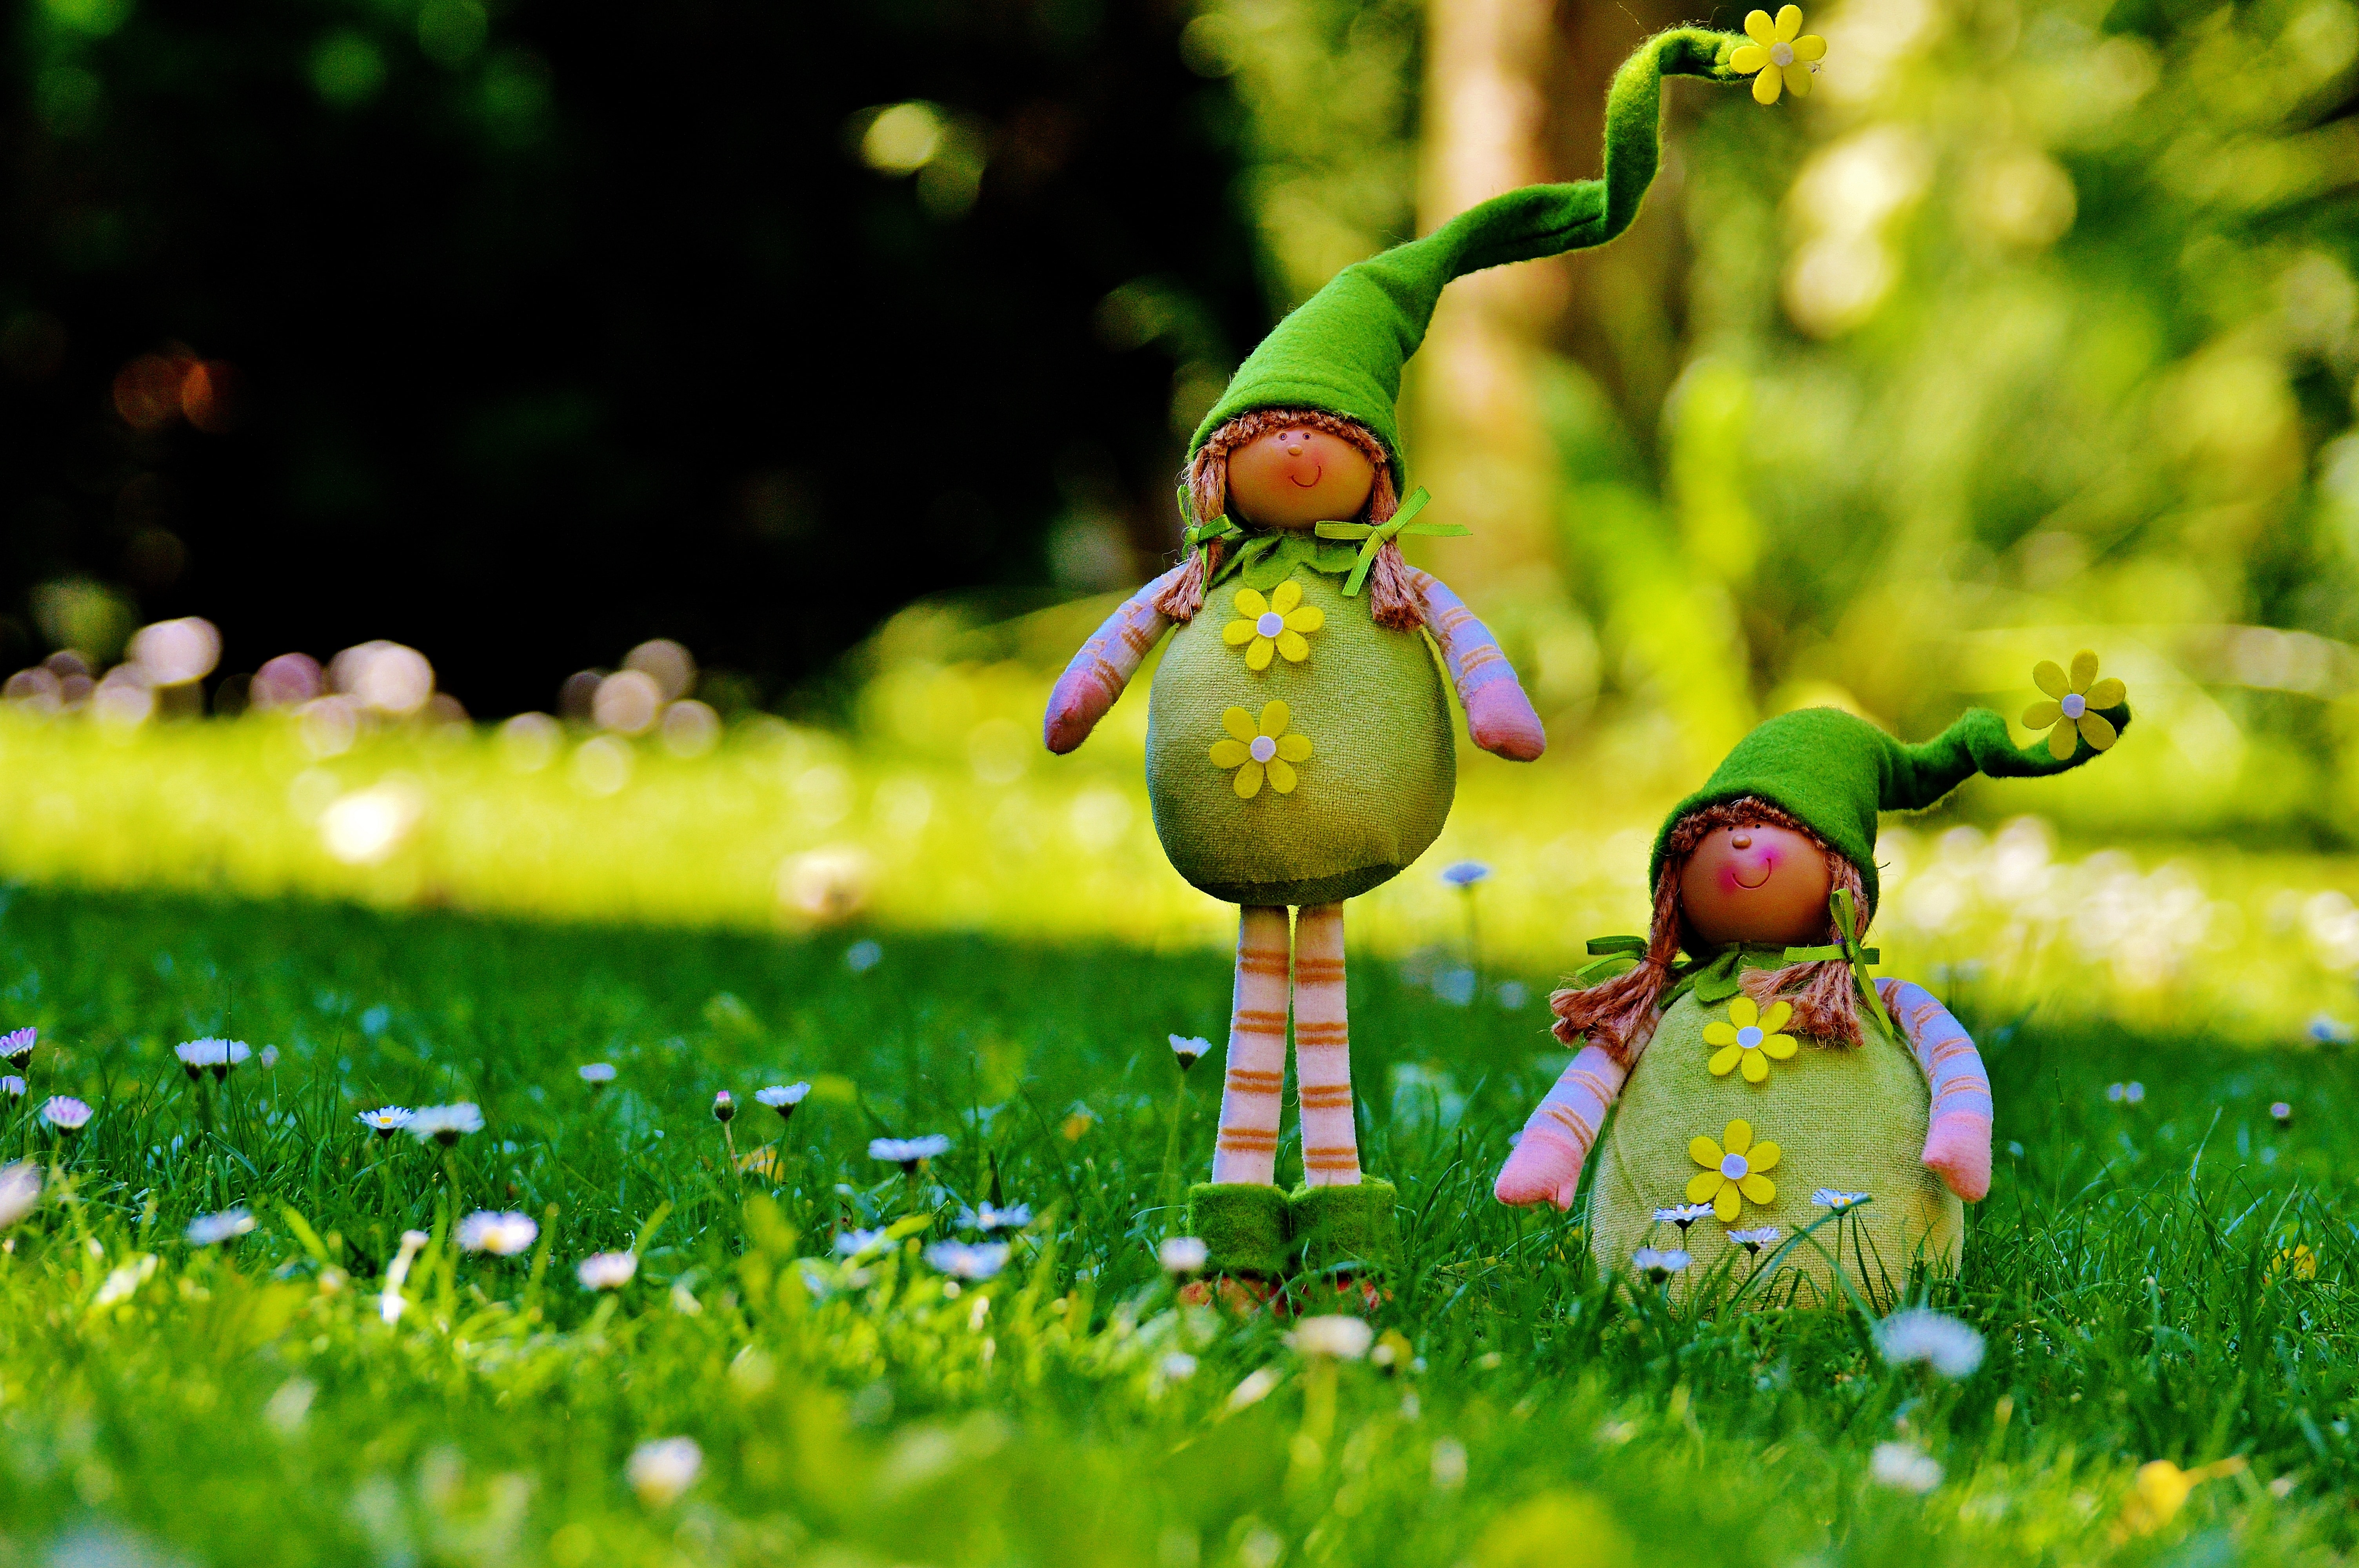 doll in green dress standing on grass during daytime